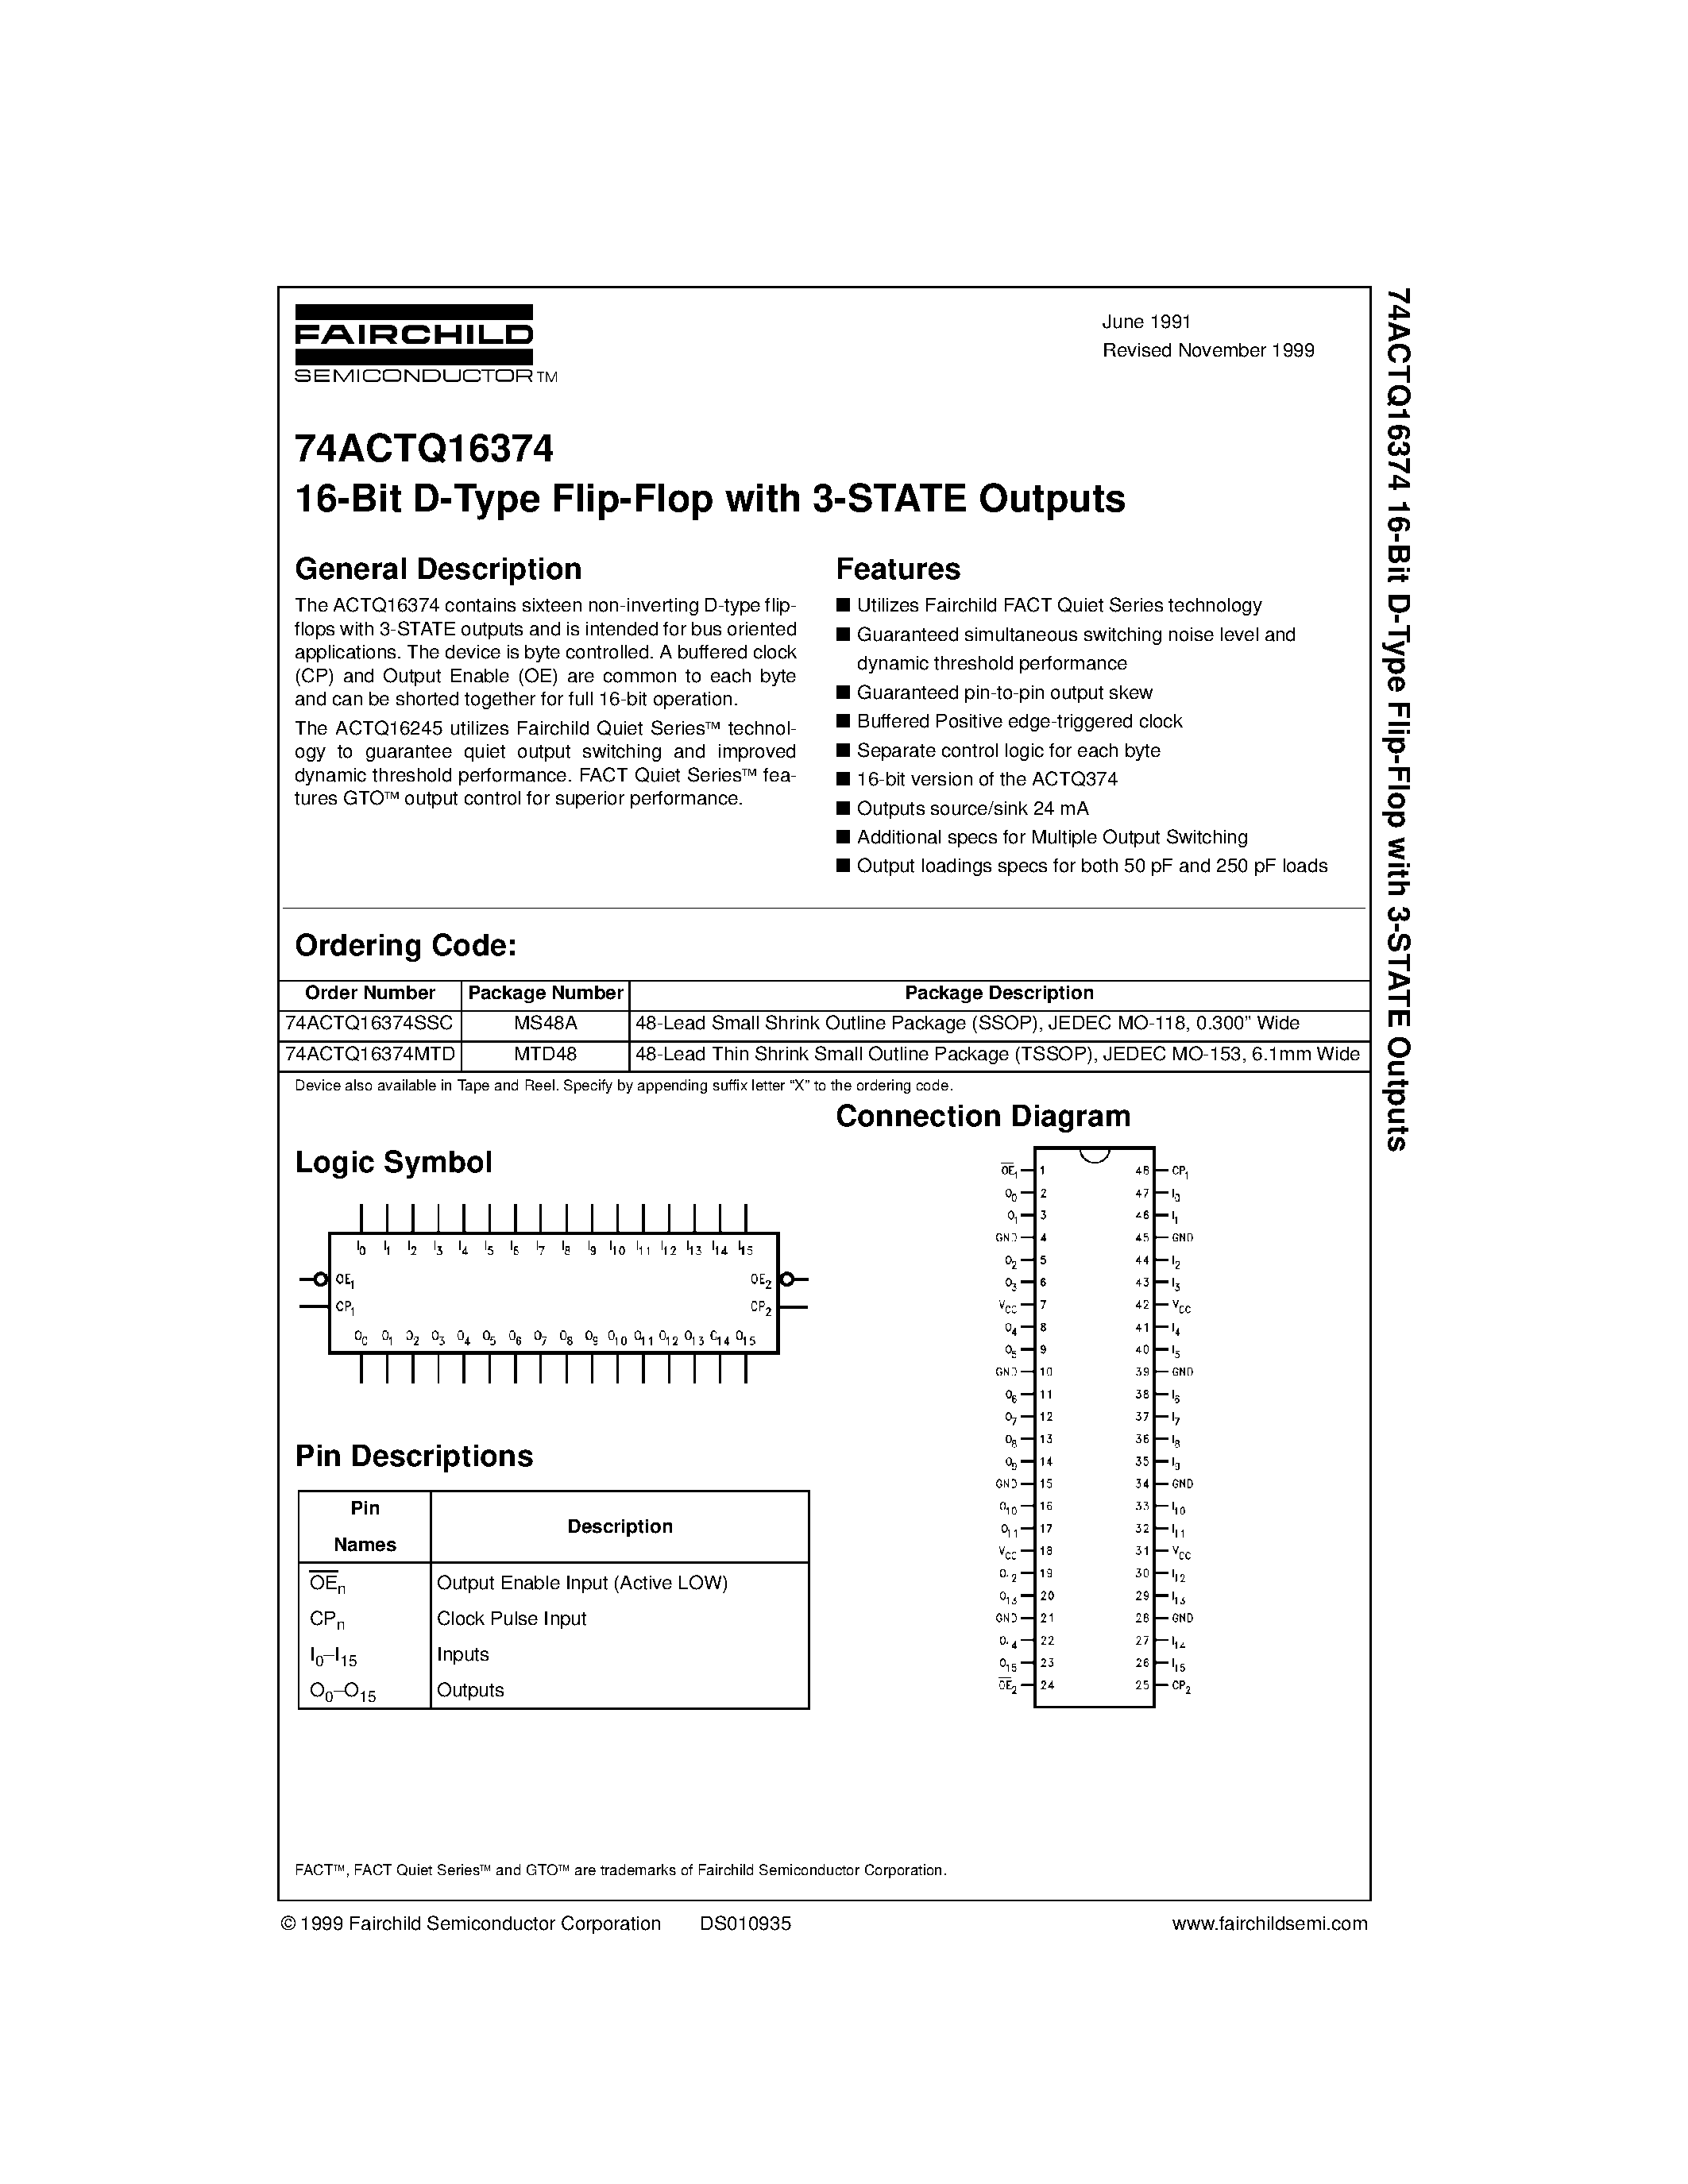 Datasheet 74ACTQ16374SSC - 16-Bit D-Type Flip-Flop with 3-STATE Outputs page 1